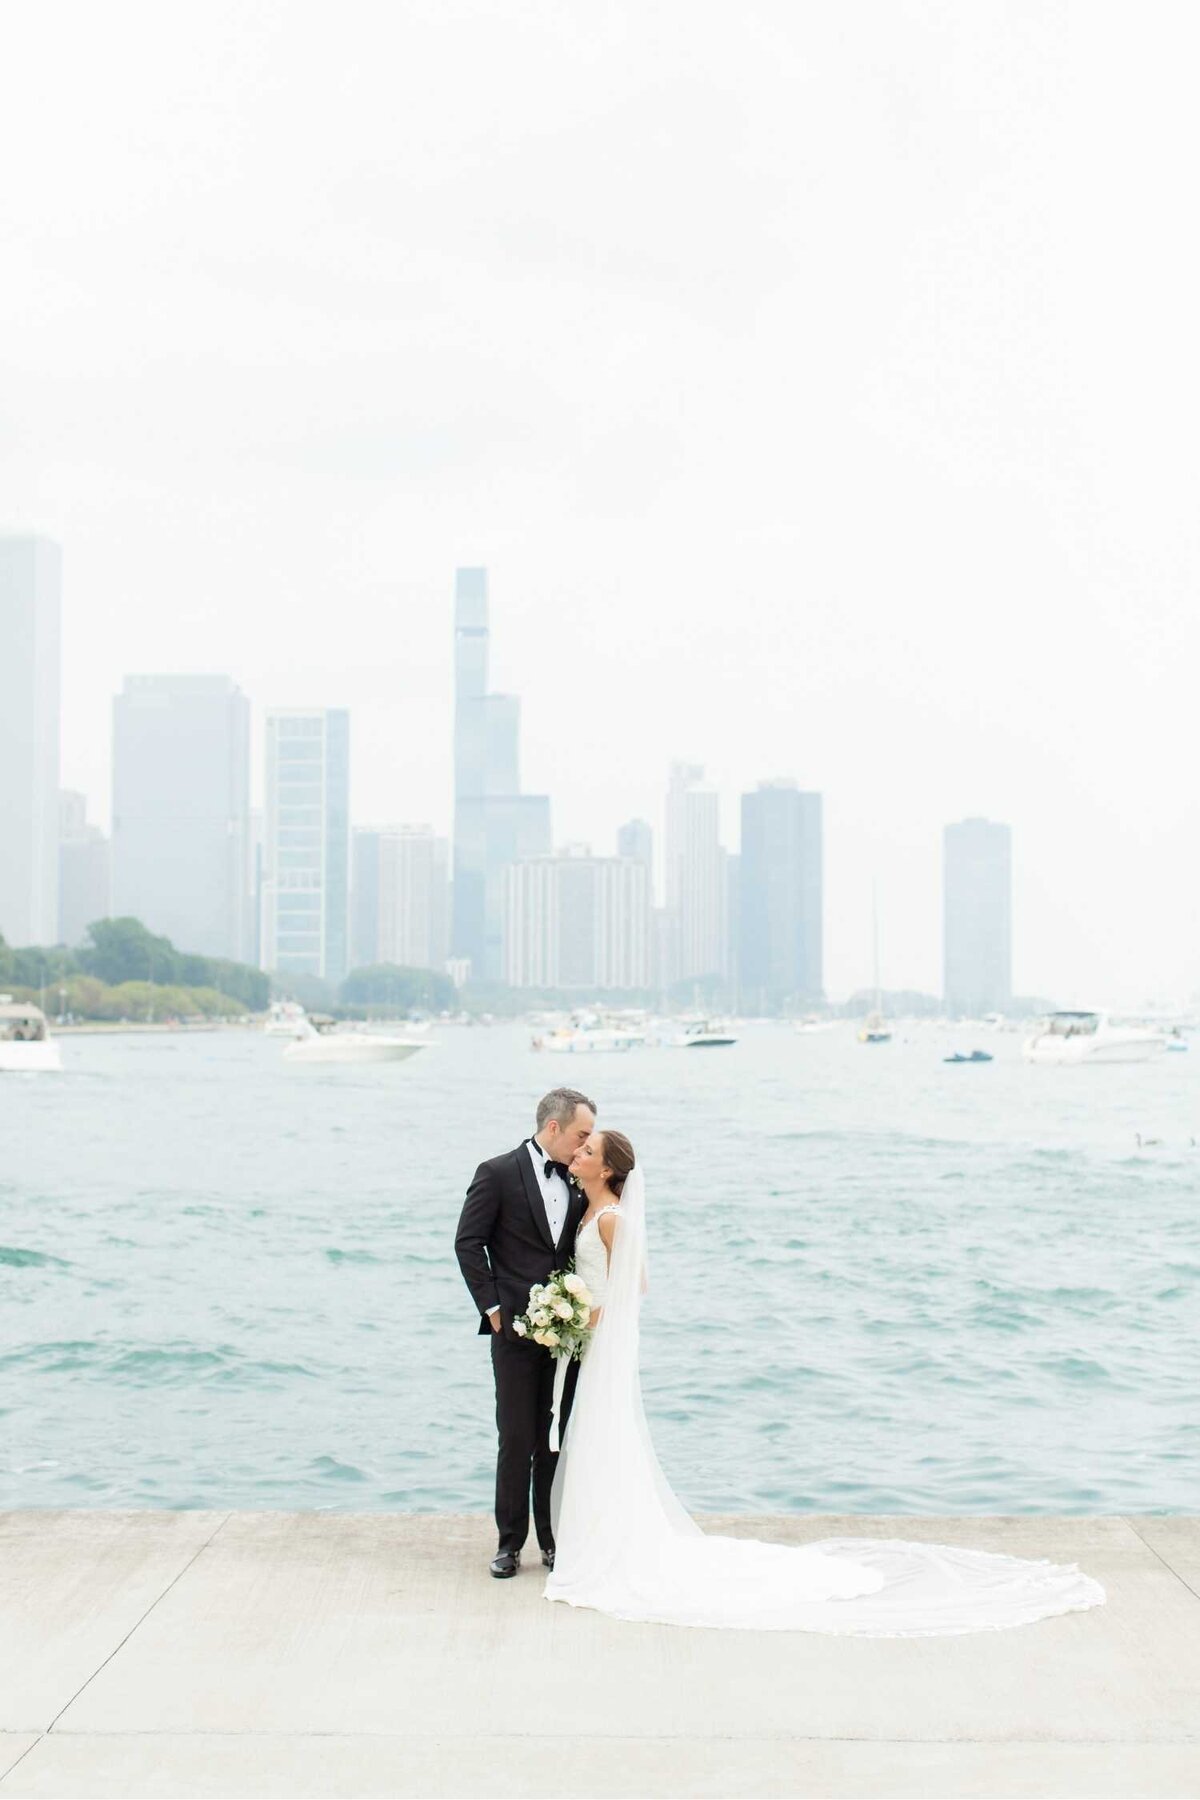 Lakefront portraits for a romantic bride and groom before their Luxury Chicago Outdoor Historic Wedding Venue.